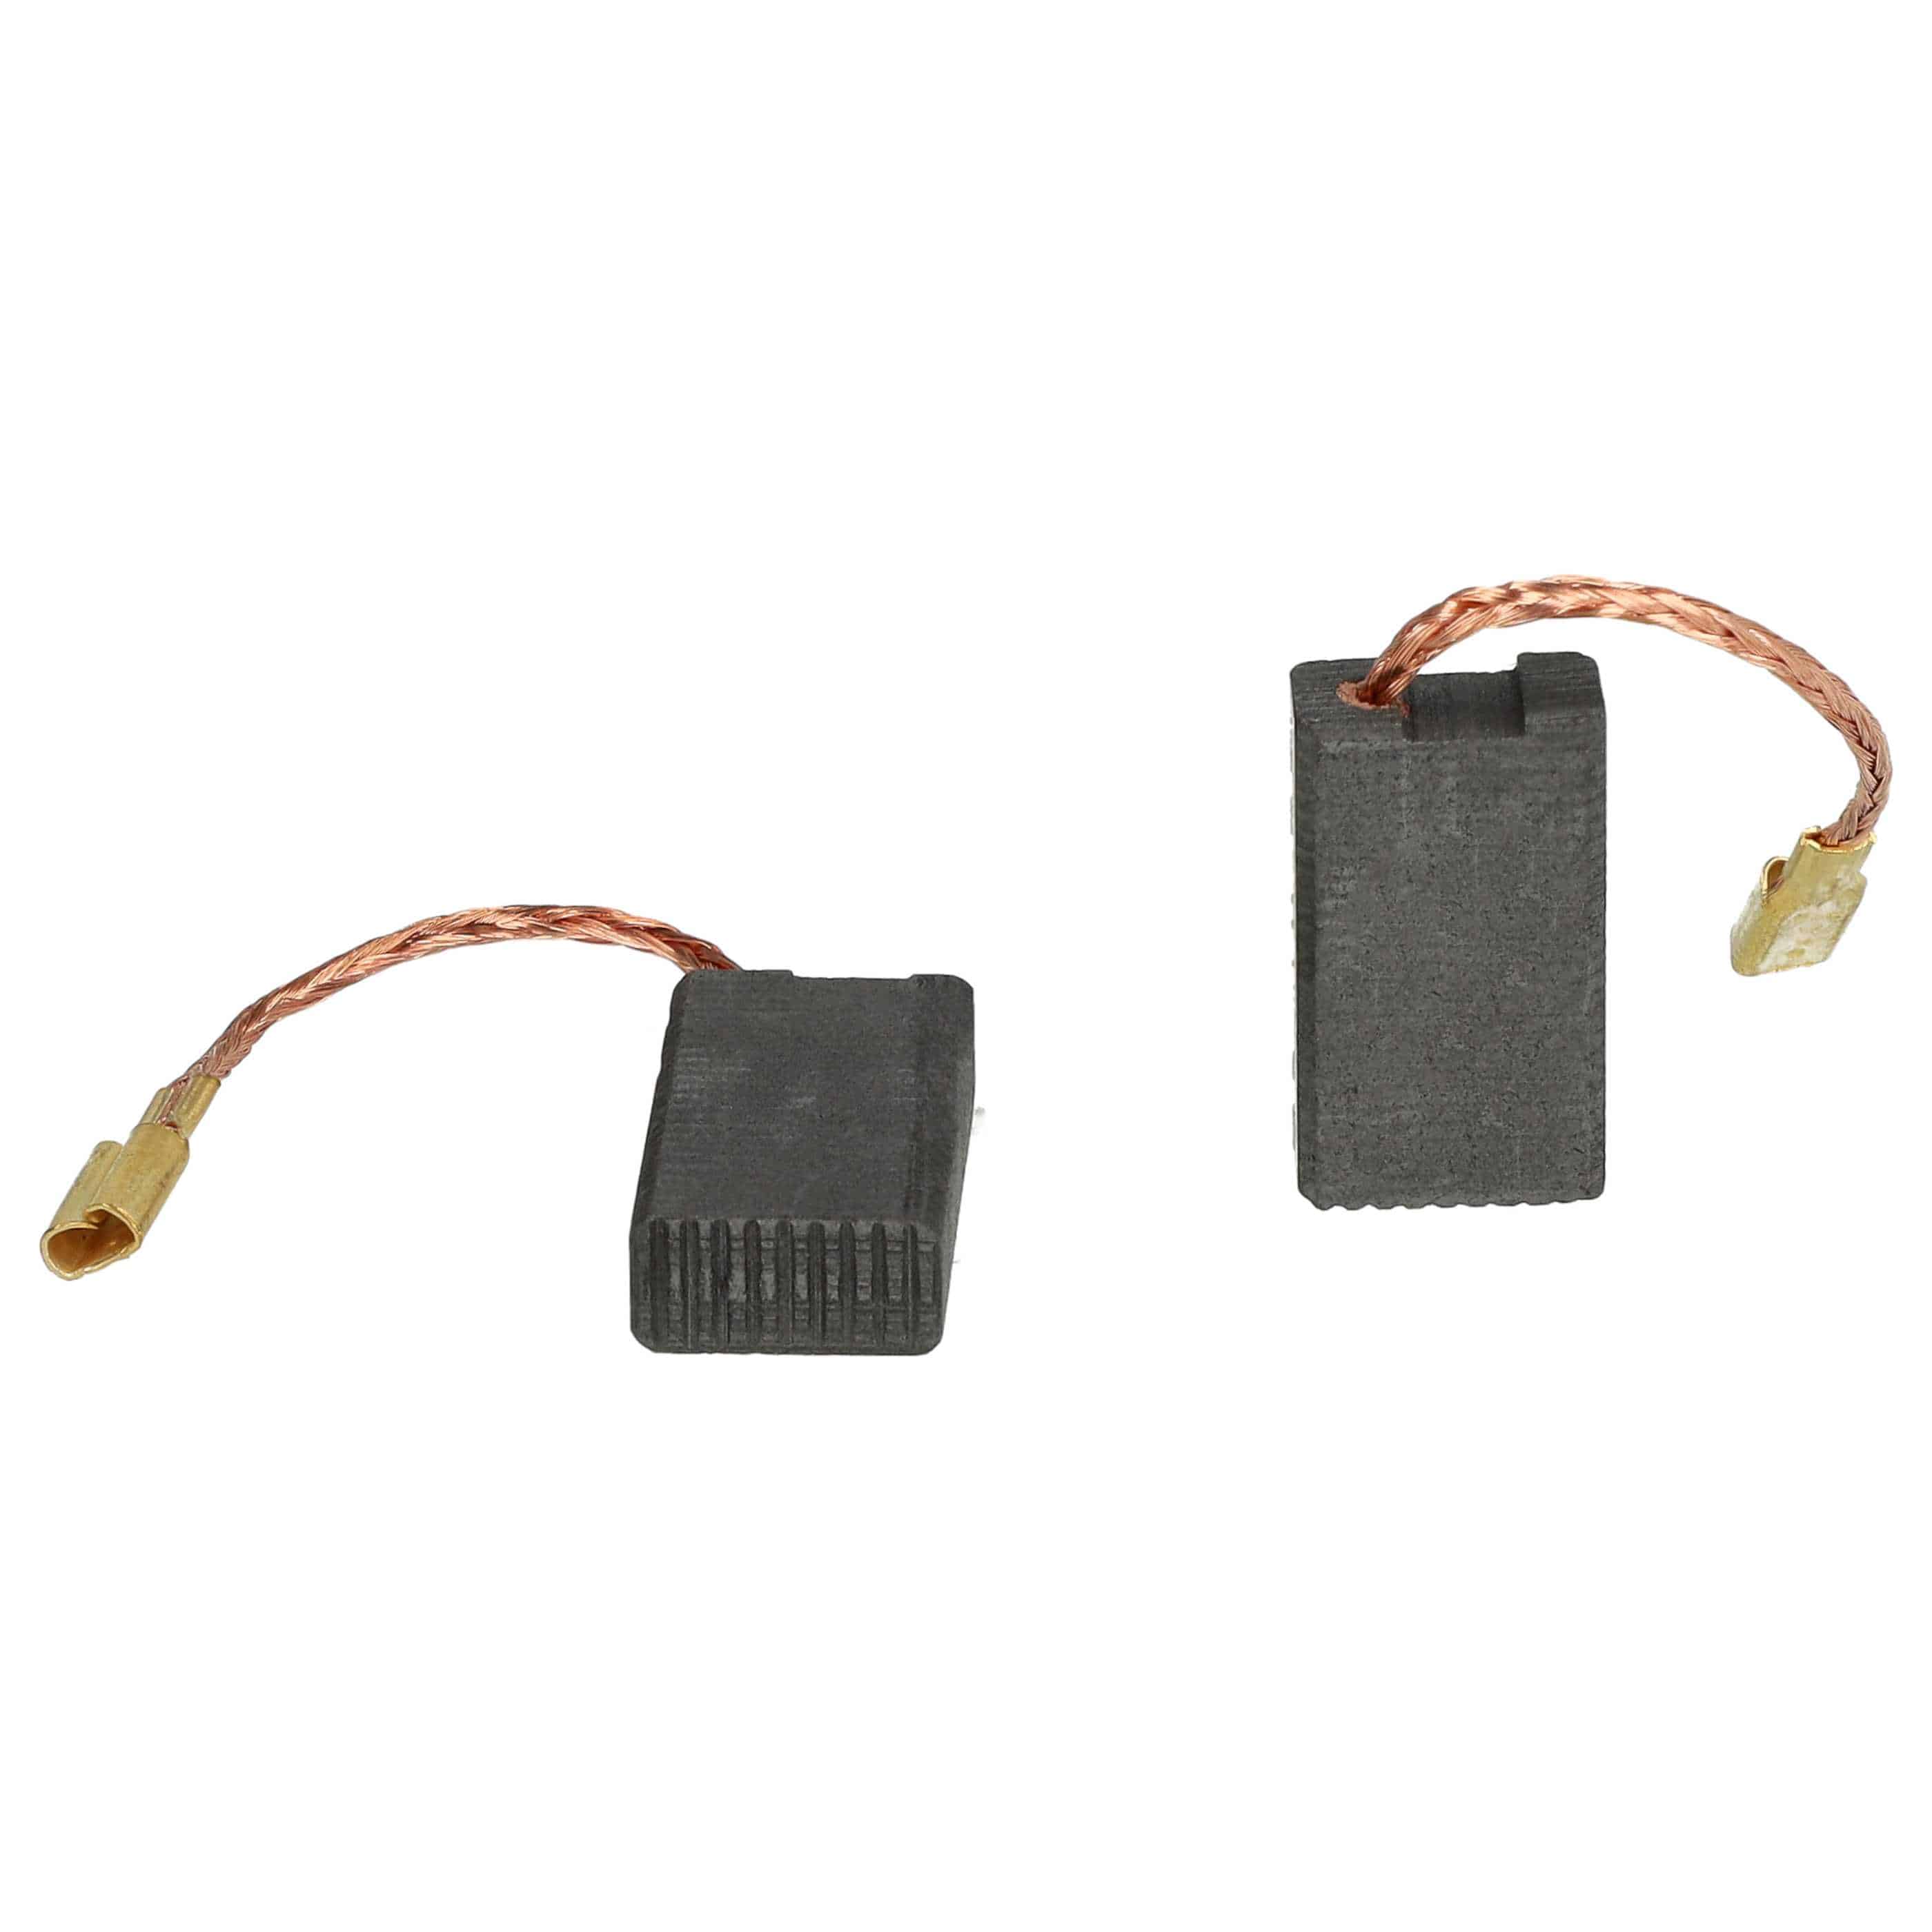 2x Carbon Brush as Replacement for AEG 322155, 326941, 343911, 360787 Electric Power Tools, 17.5 x 10 x 5mm